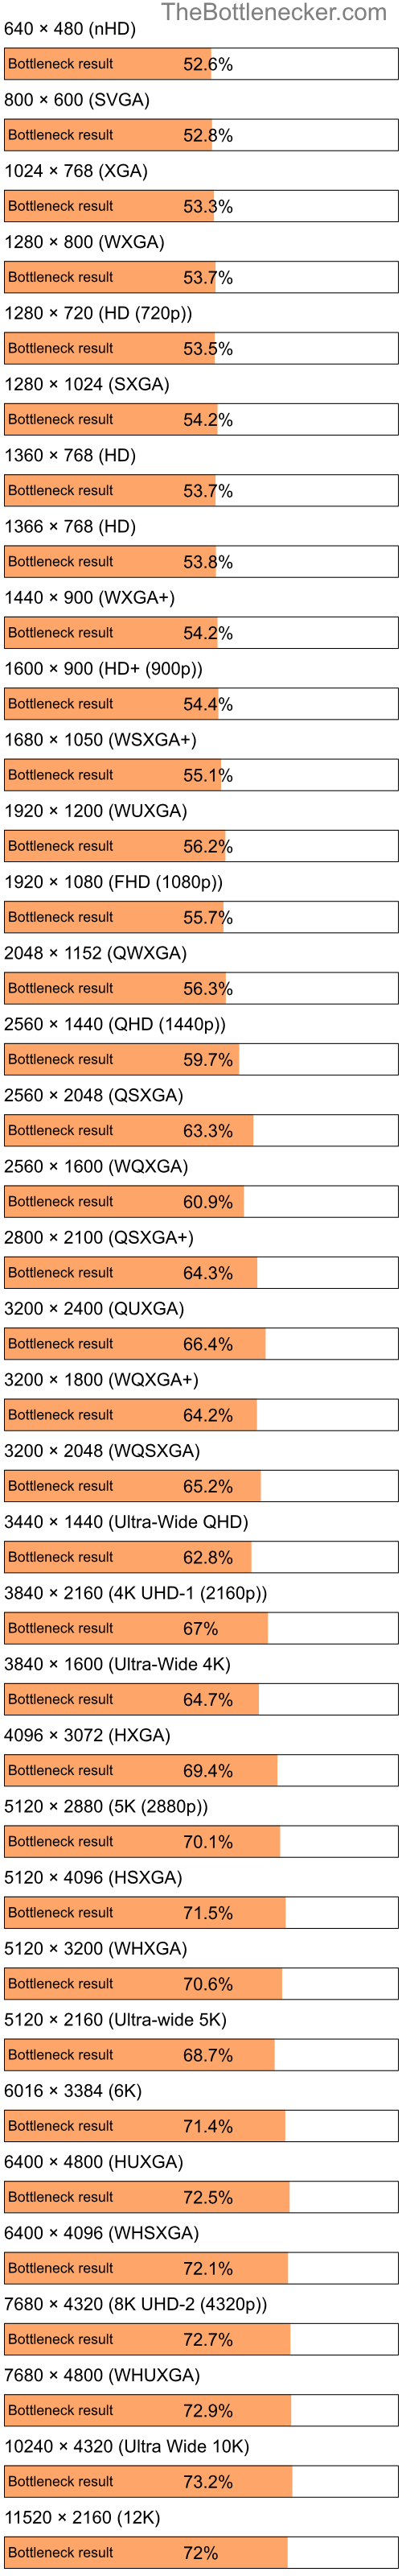 Bottleneck results by resolution for Intel Pentium 4 and AMD Radeon X800GT in Processor Intense Tasks